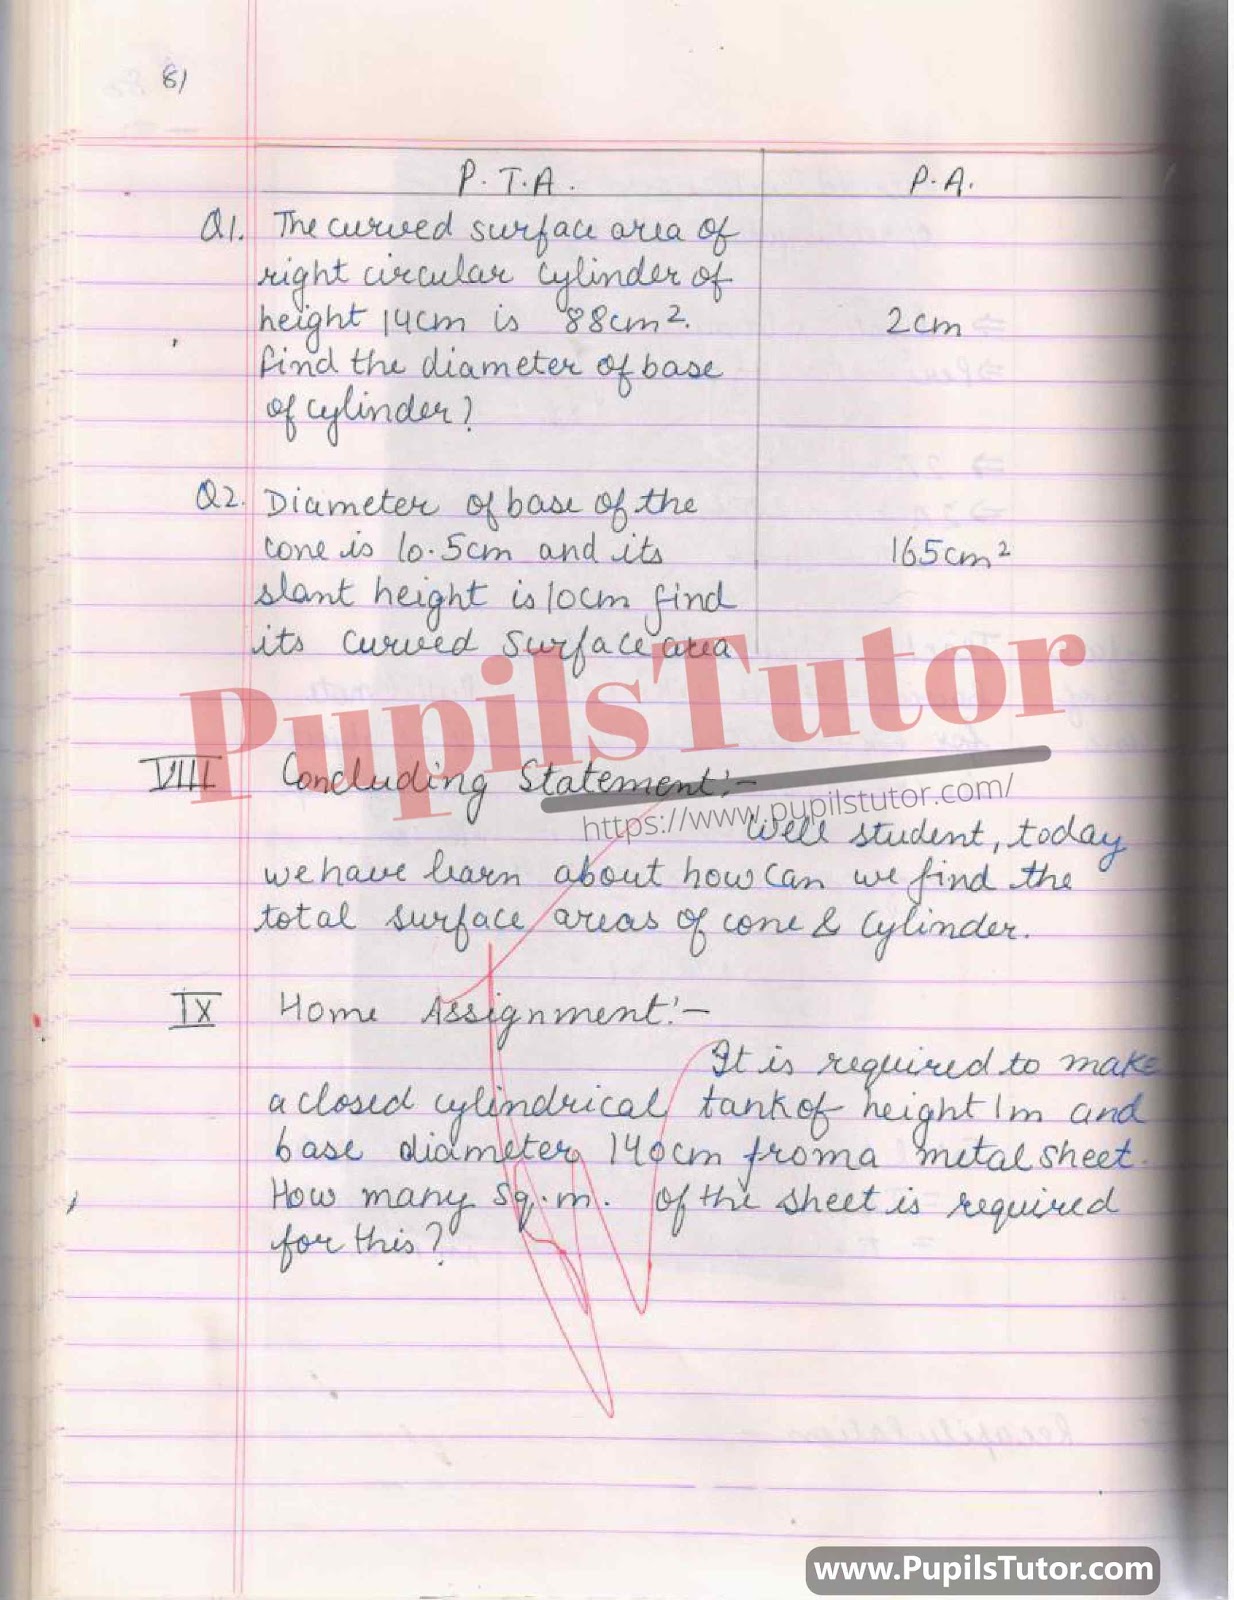 Surface Area Of Cone And Cylinder Lesson Plan For B.Ed 1st Year, 2nd Year And All Semesters Students – [Page 6] – pupilstutor.com